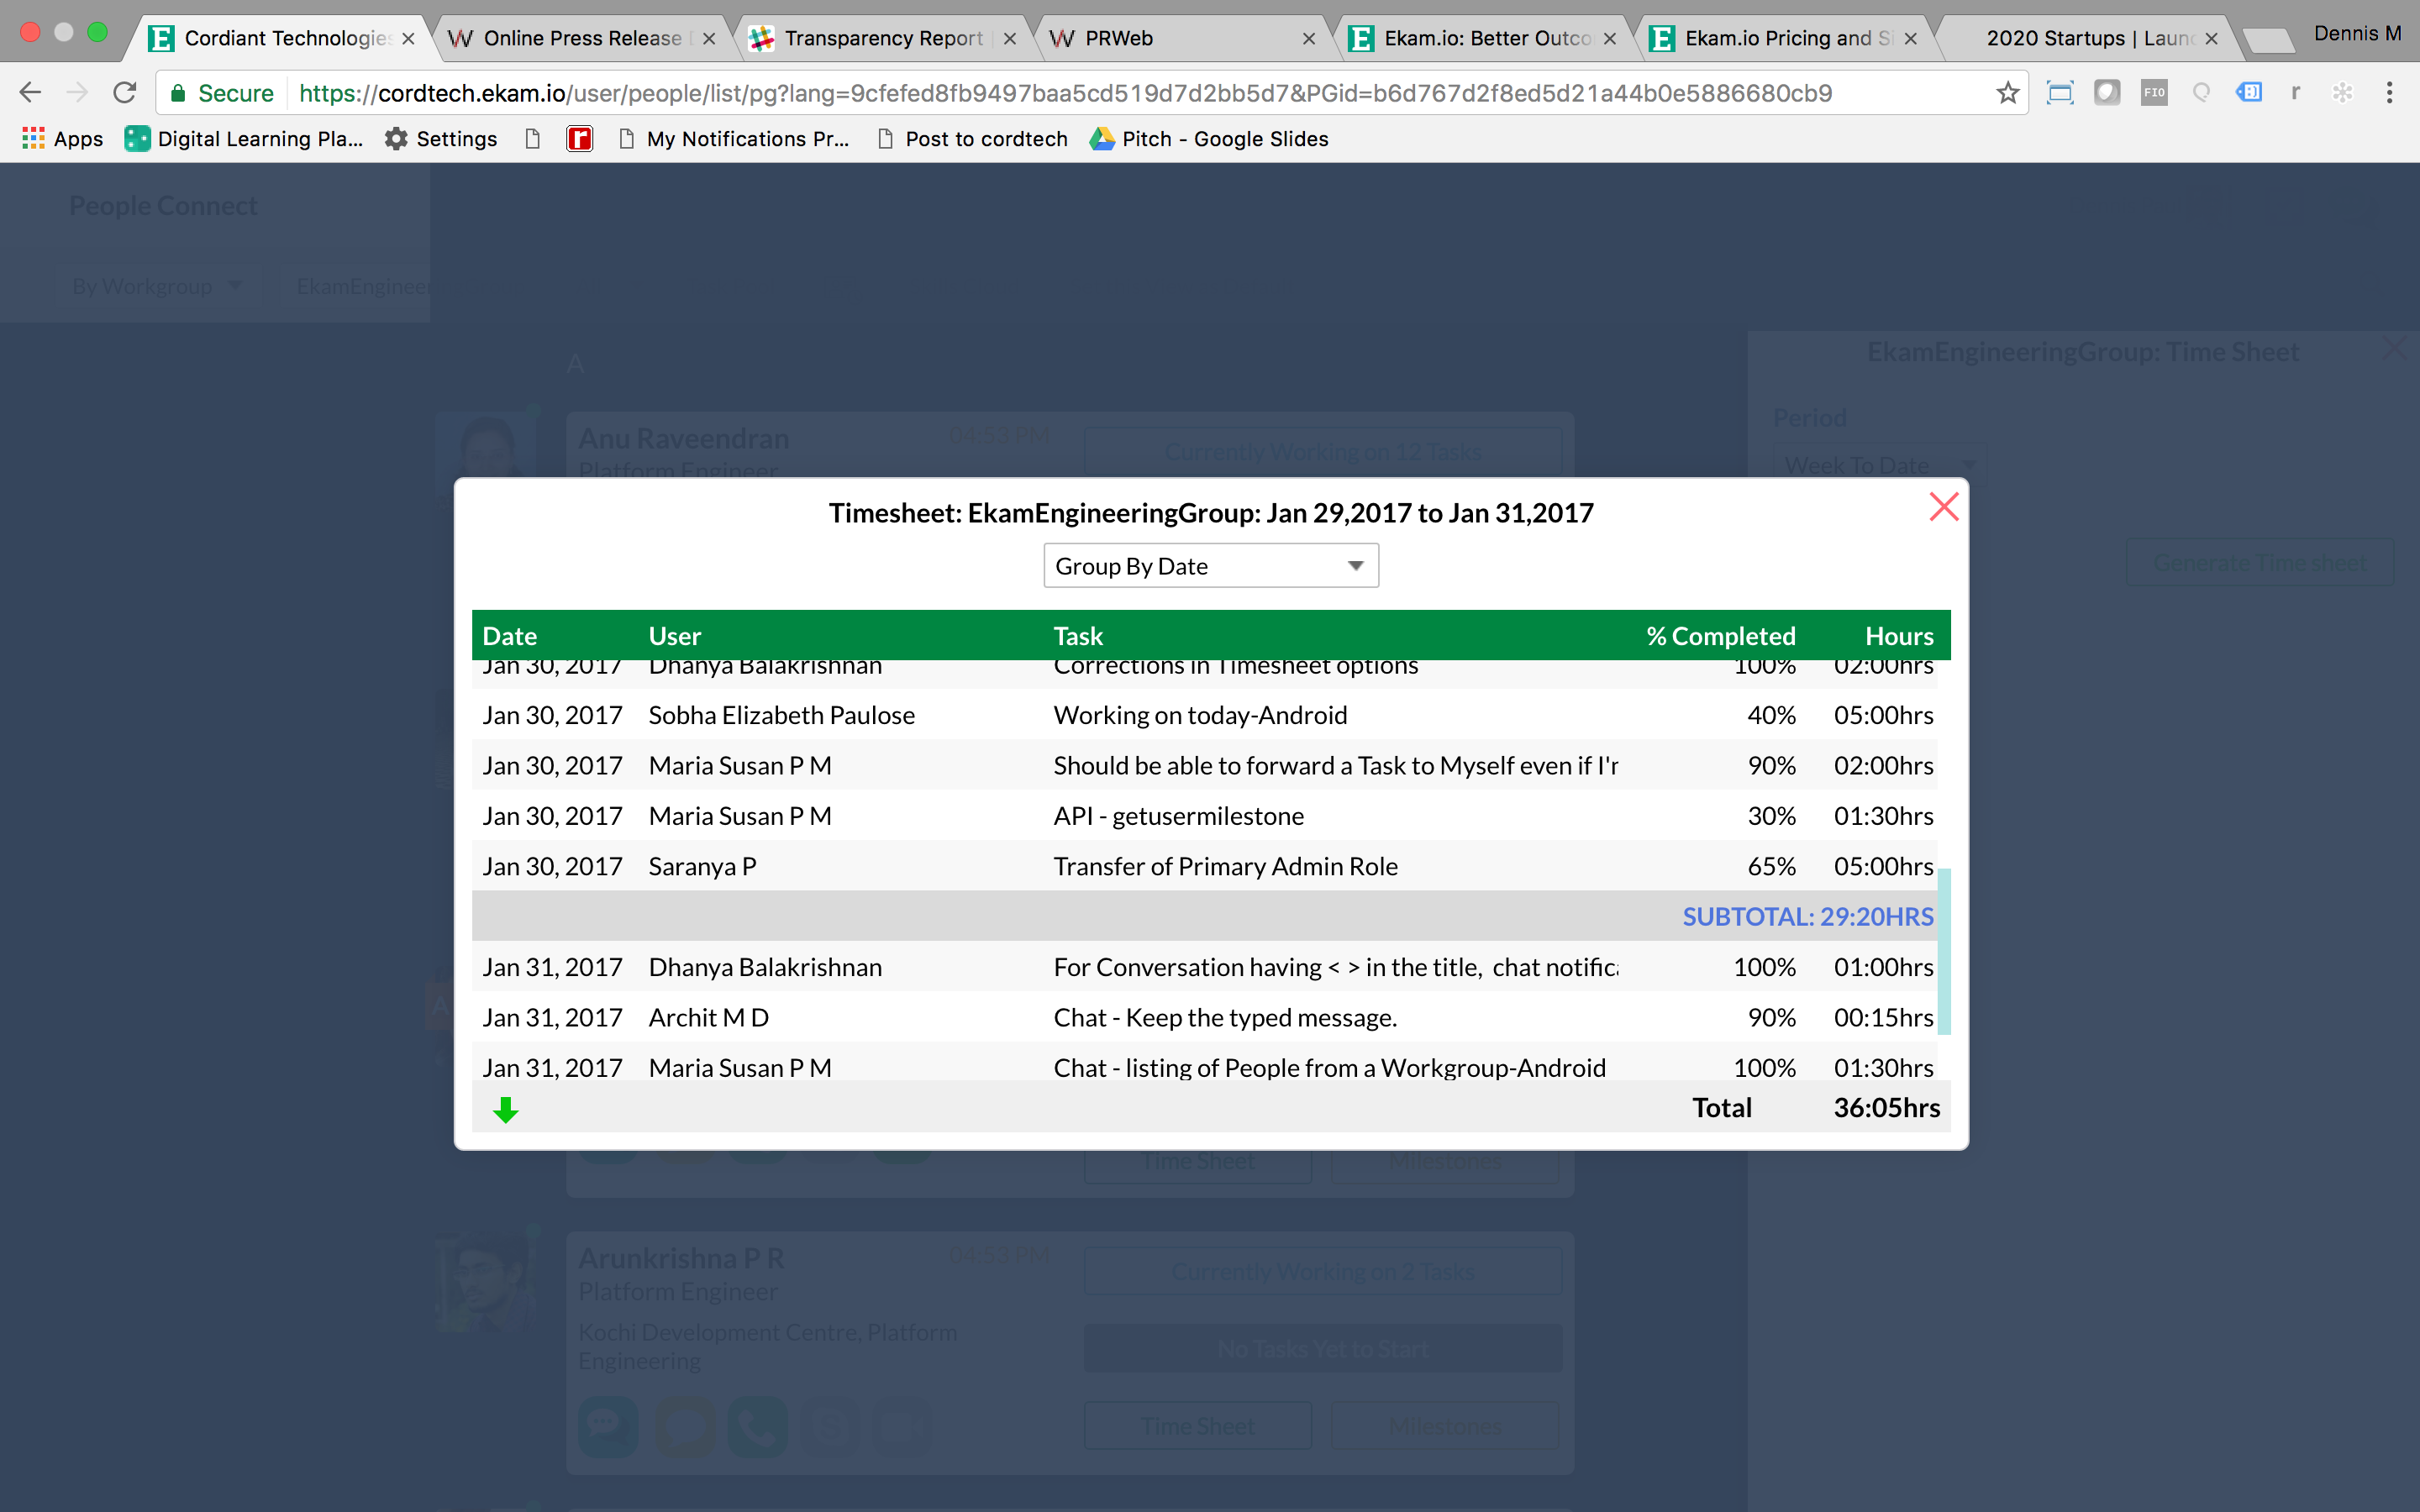 Auto-generated Offshore Project Team Time Sheets in  Real Time on Ekam